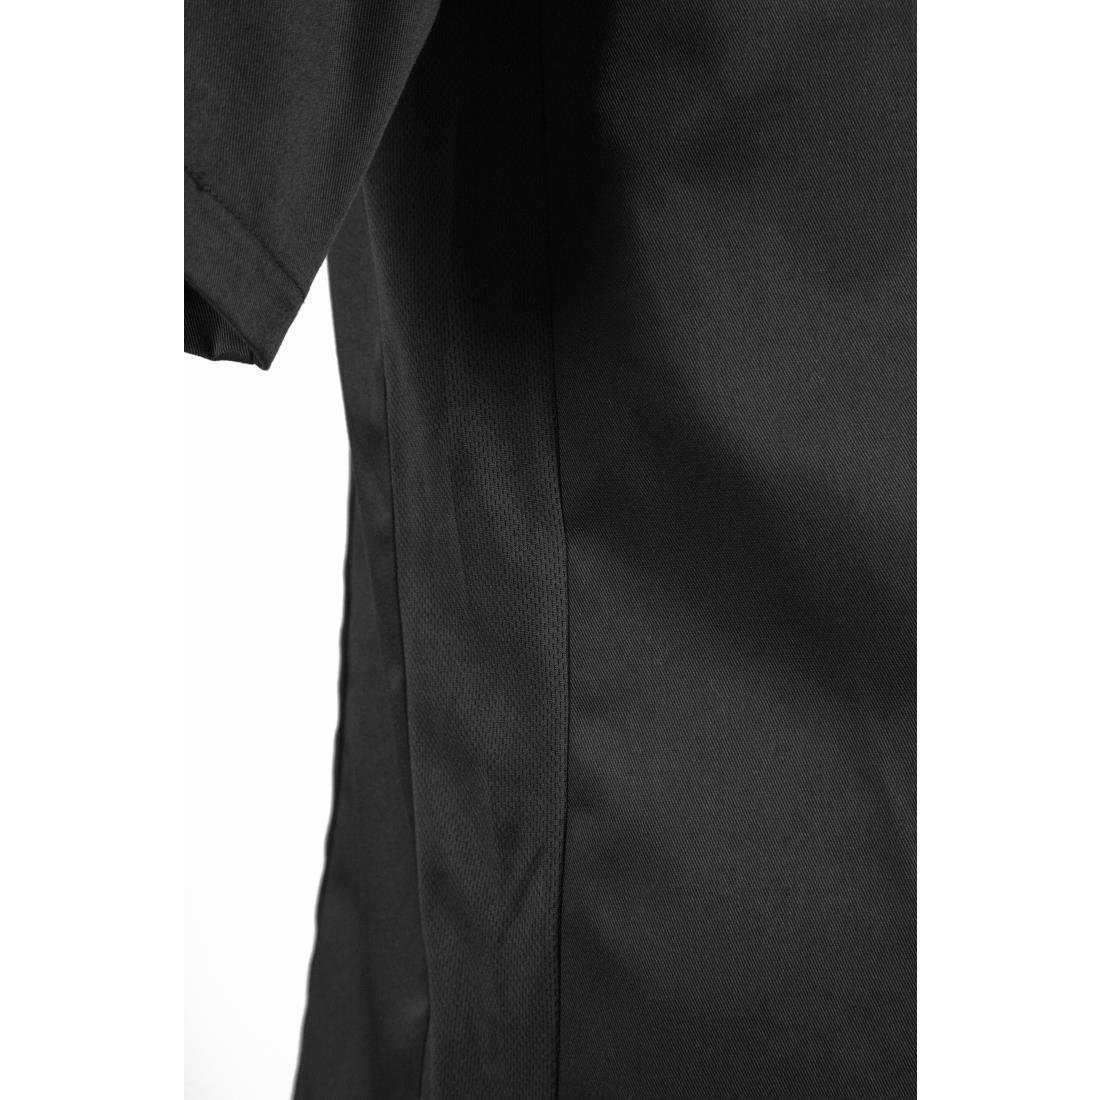 BB711-L Southside Band Collar Chefs Jacket Black Size L JD Catering Equipment Solutions Ltd